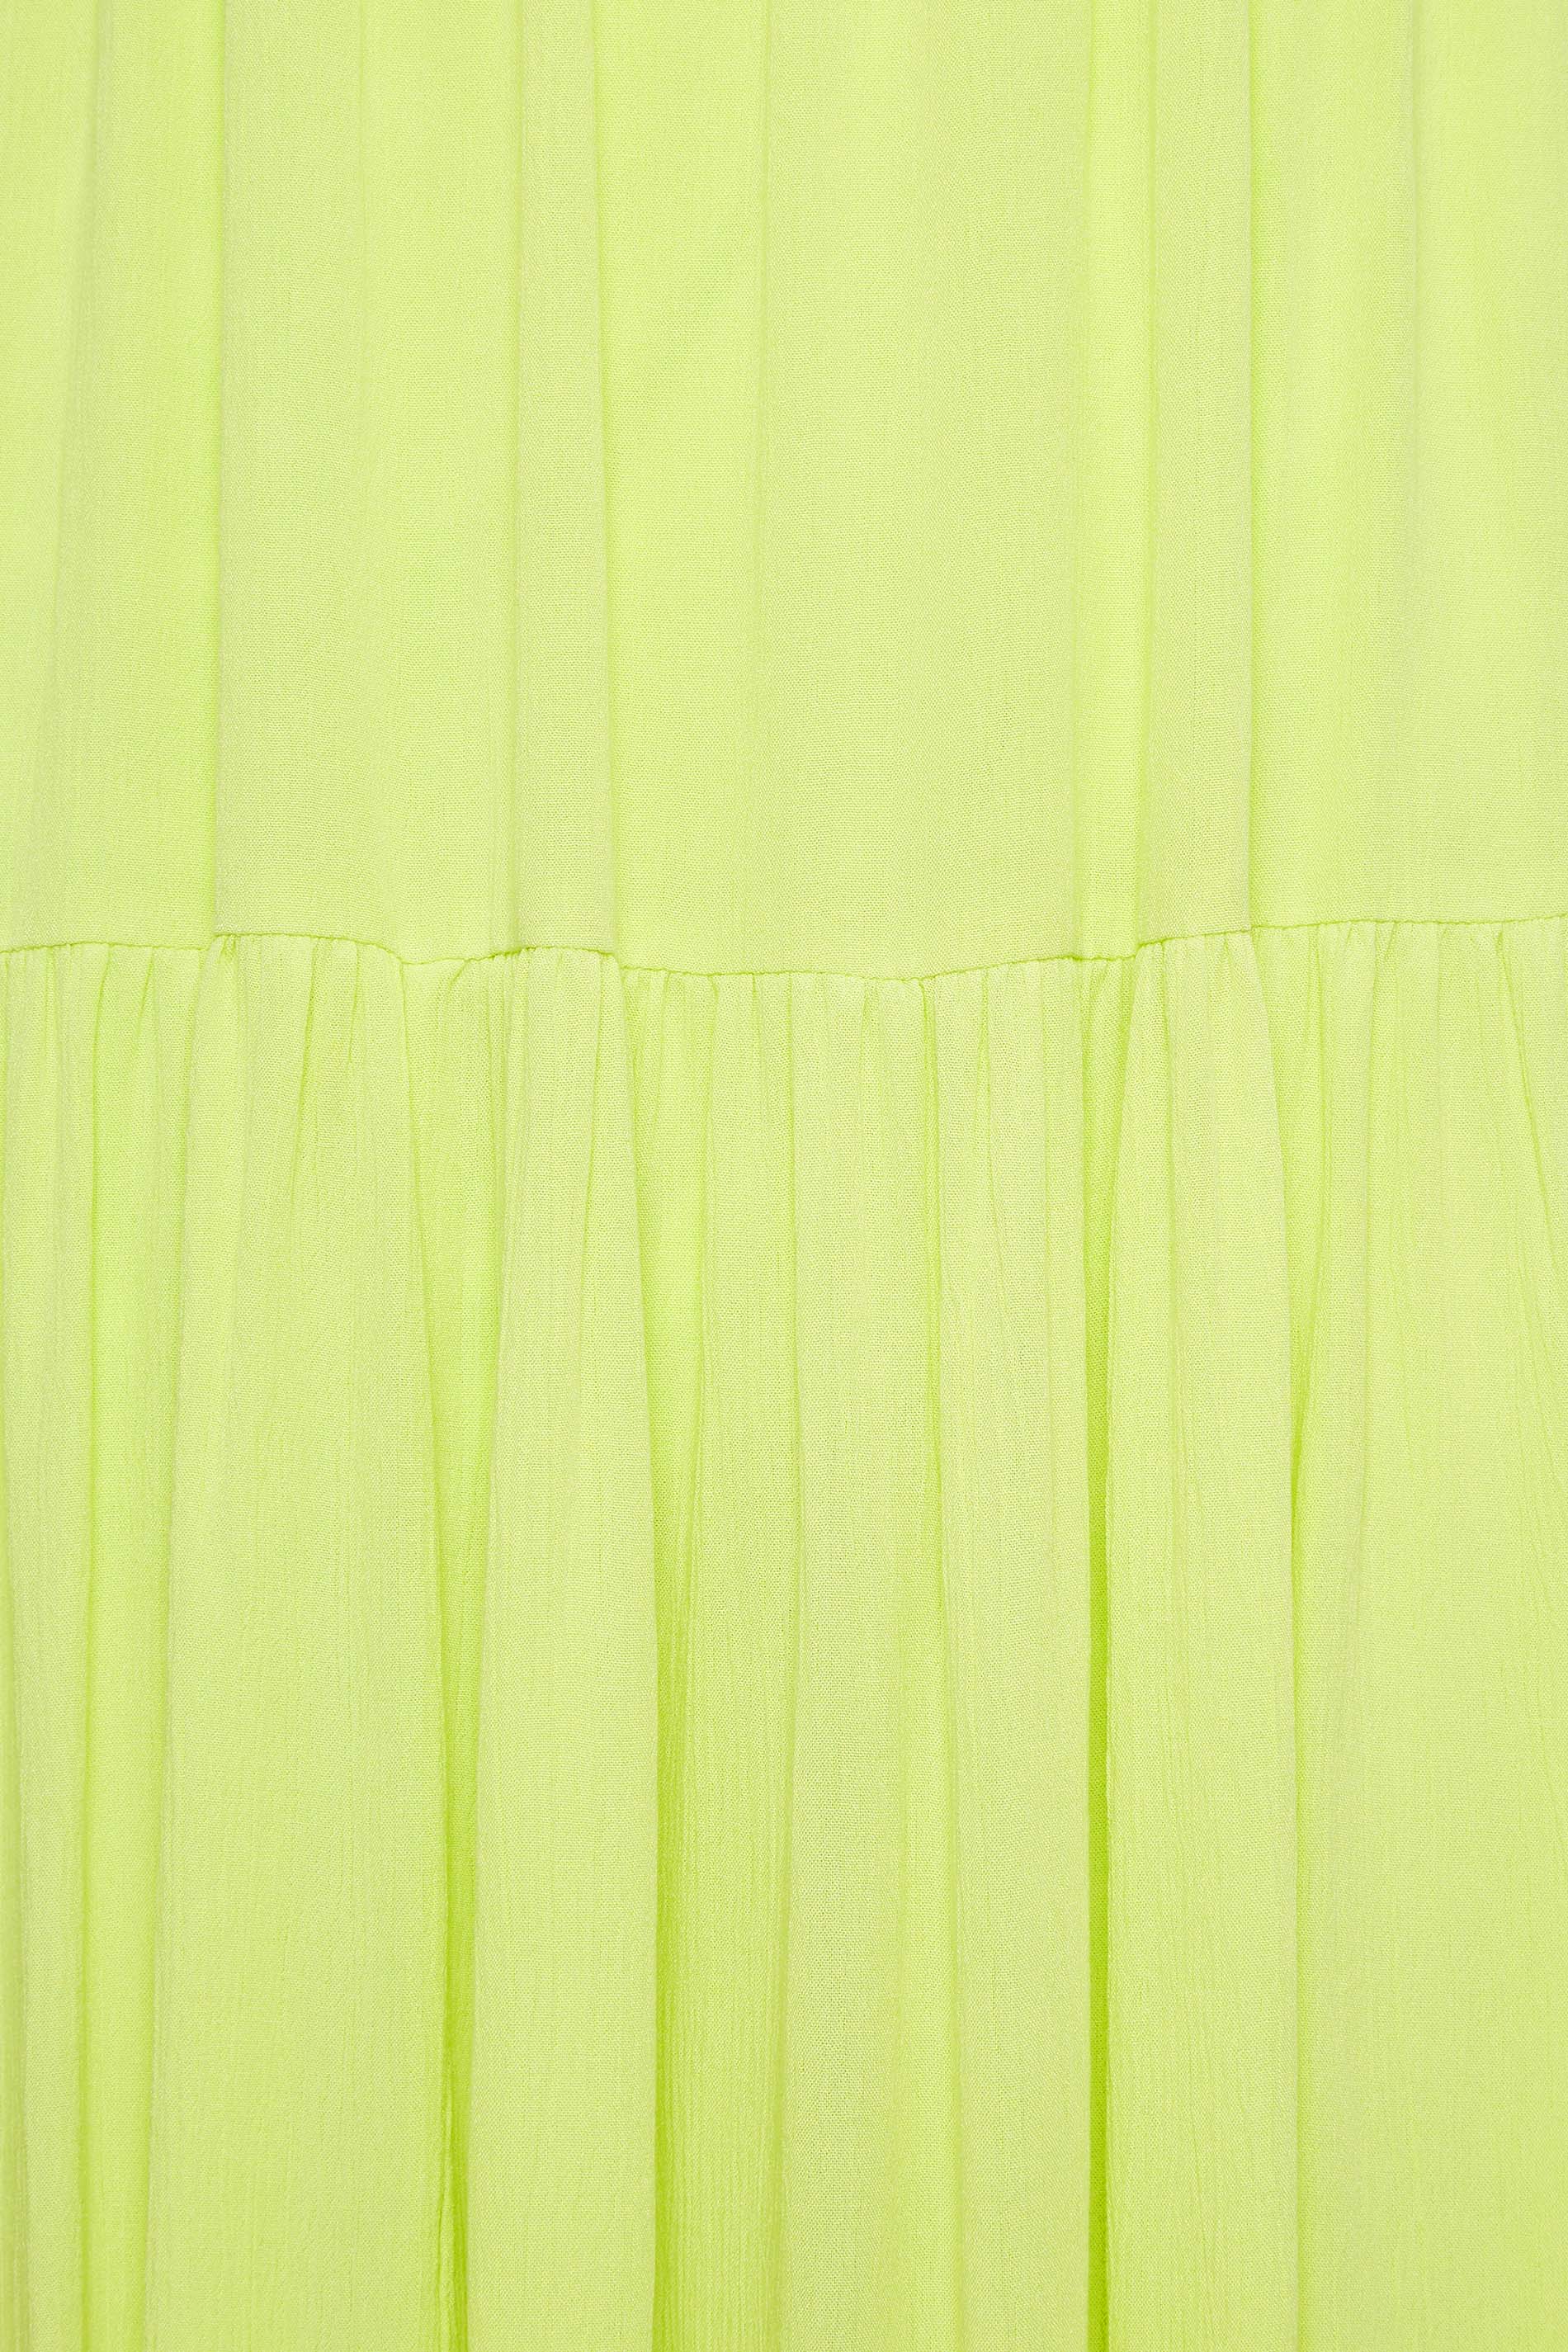 YOURS Plus Size Lime Green Shirred Strappy Sundress | Yours Clothing